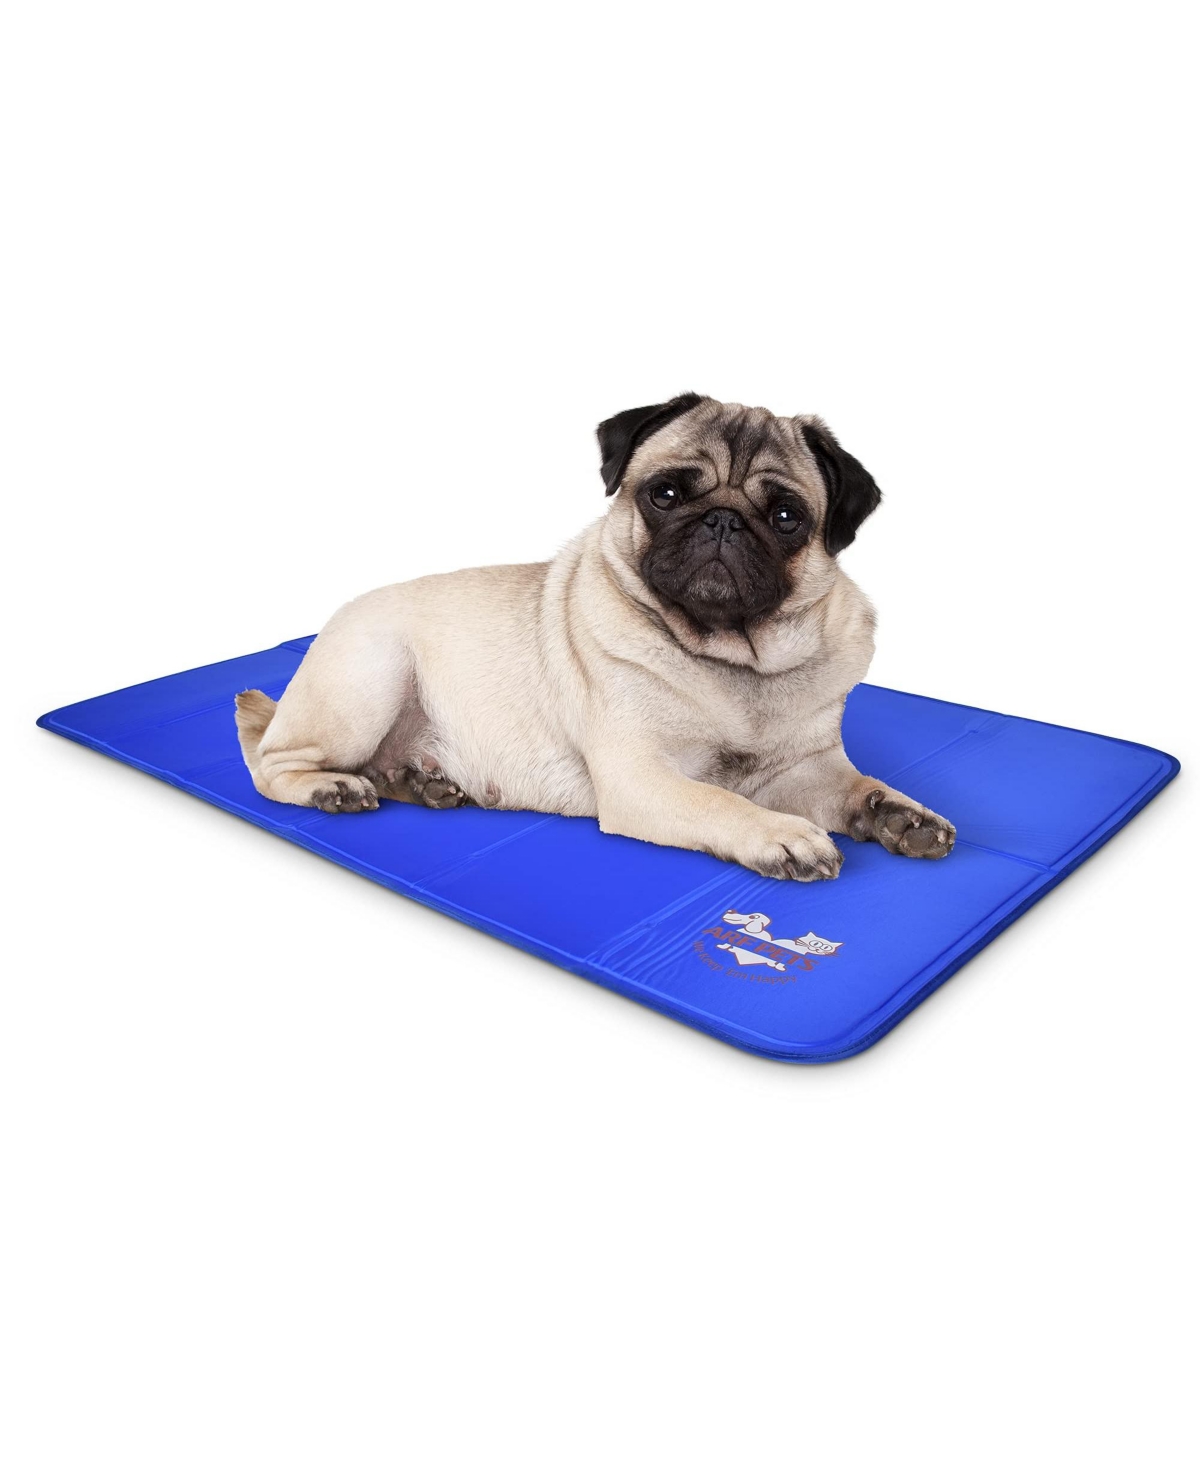 Self Cooling Pet Bed, Dog Mat for Crates and Beds - Small - Blue